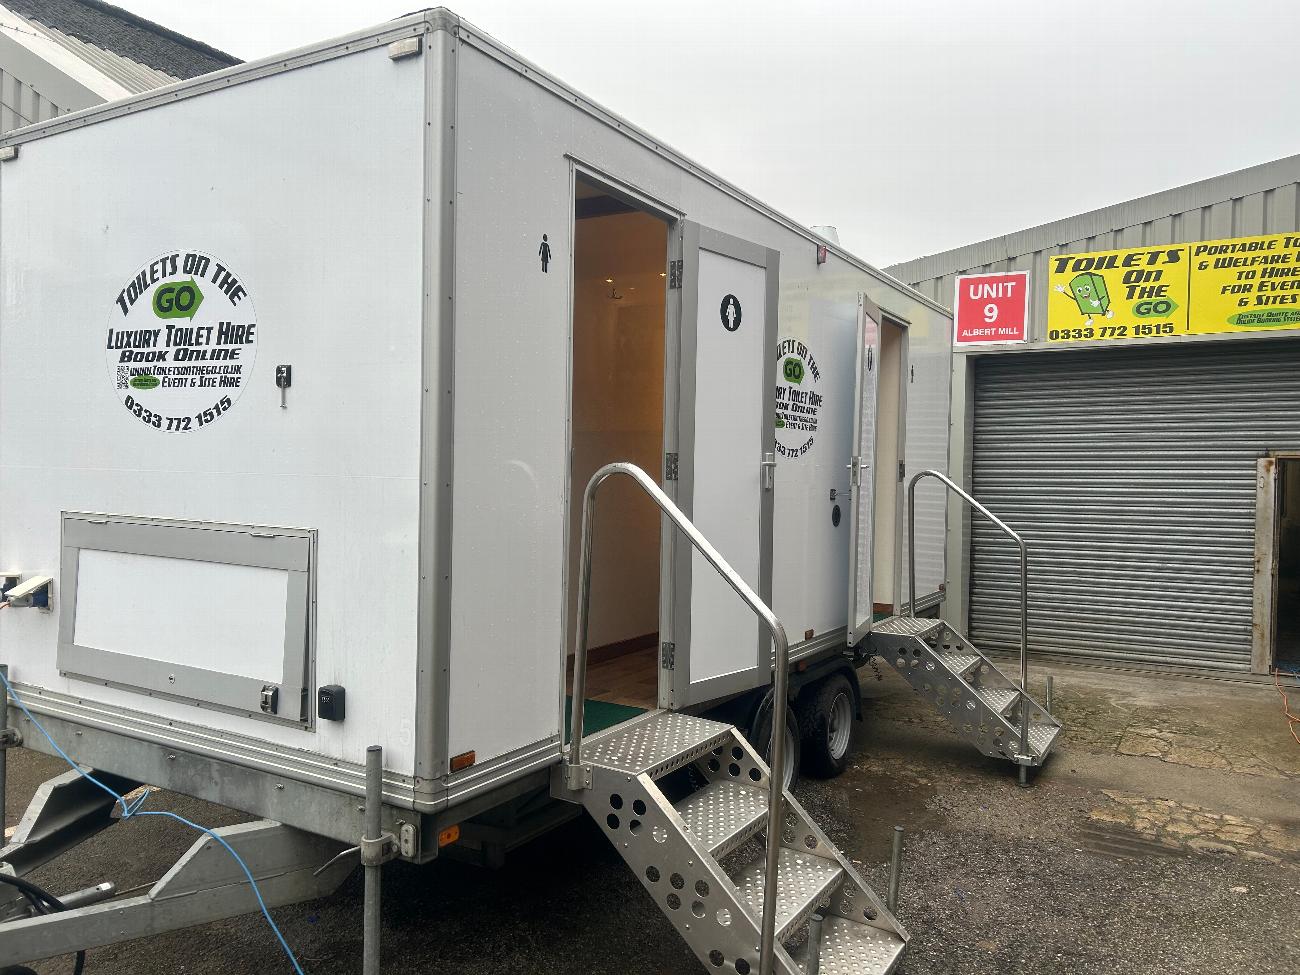 Gallery | Portable Toilet Loo Hire Rental Company in North West uk and Manchester gallery image 8